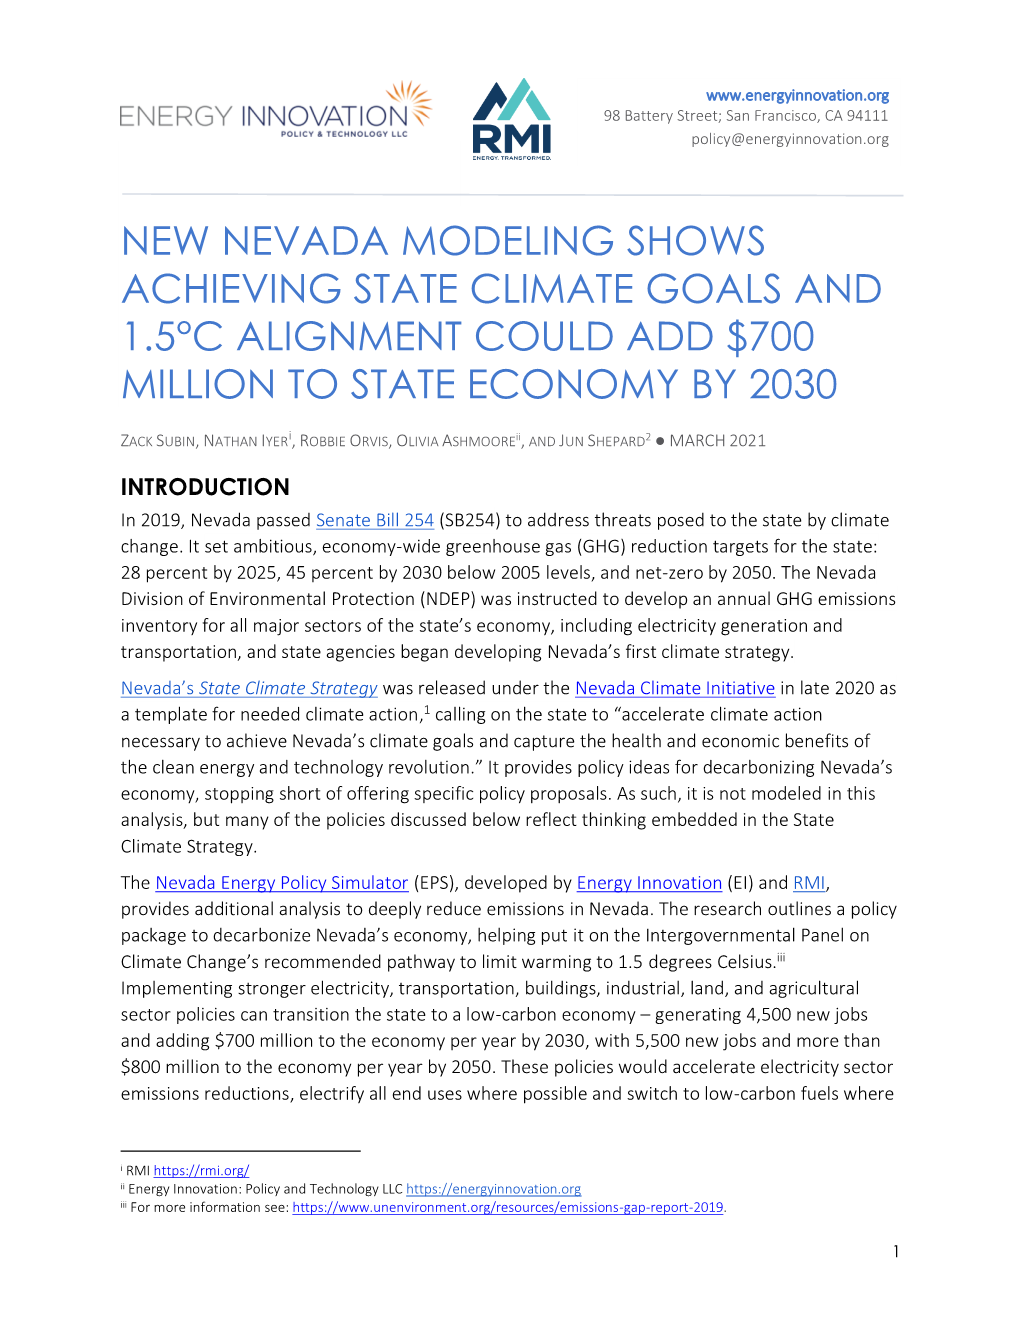 New Nevada Modeling Shows Achieving State Climate Goals and 1.5°C Alignment Could Add $700 Million to State Economy by 2030